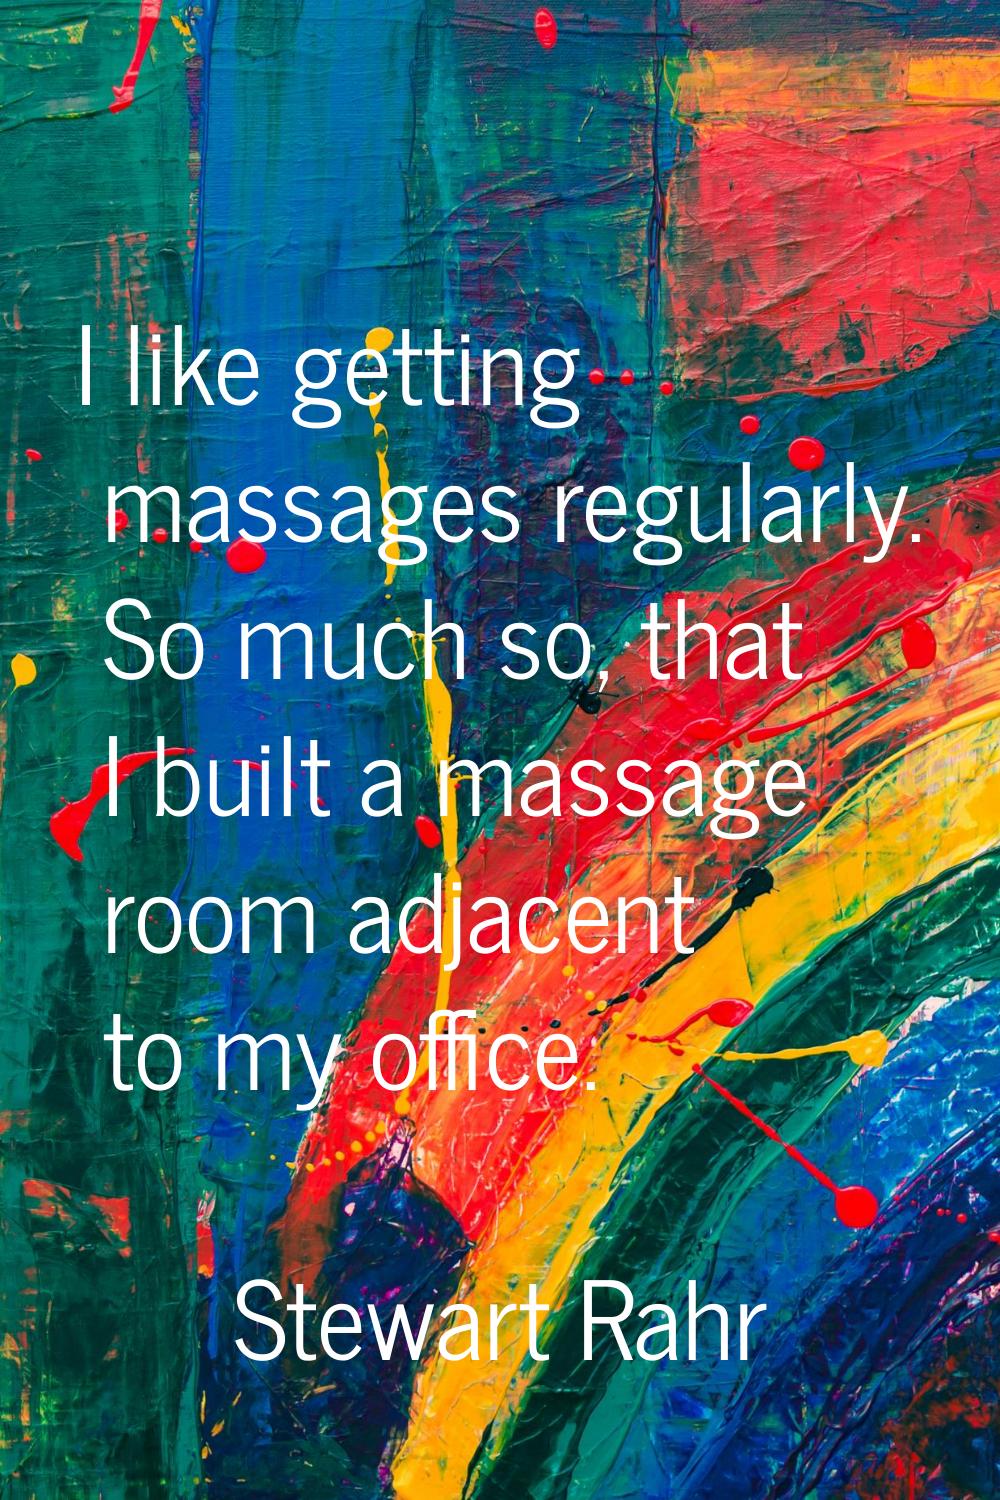 I like getting massages regularly. So much so, that I built a massage room adjacent to my office.